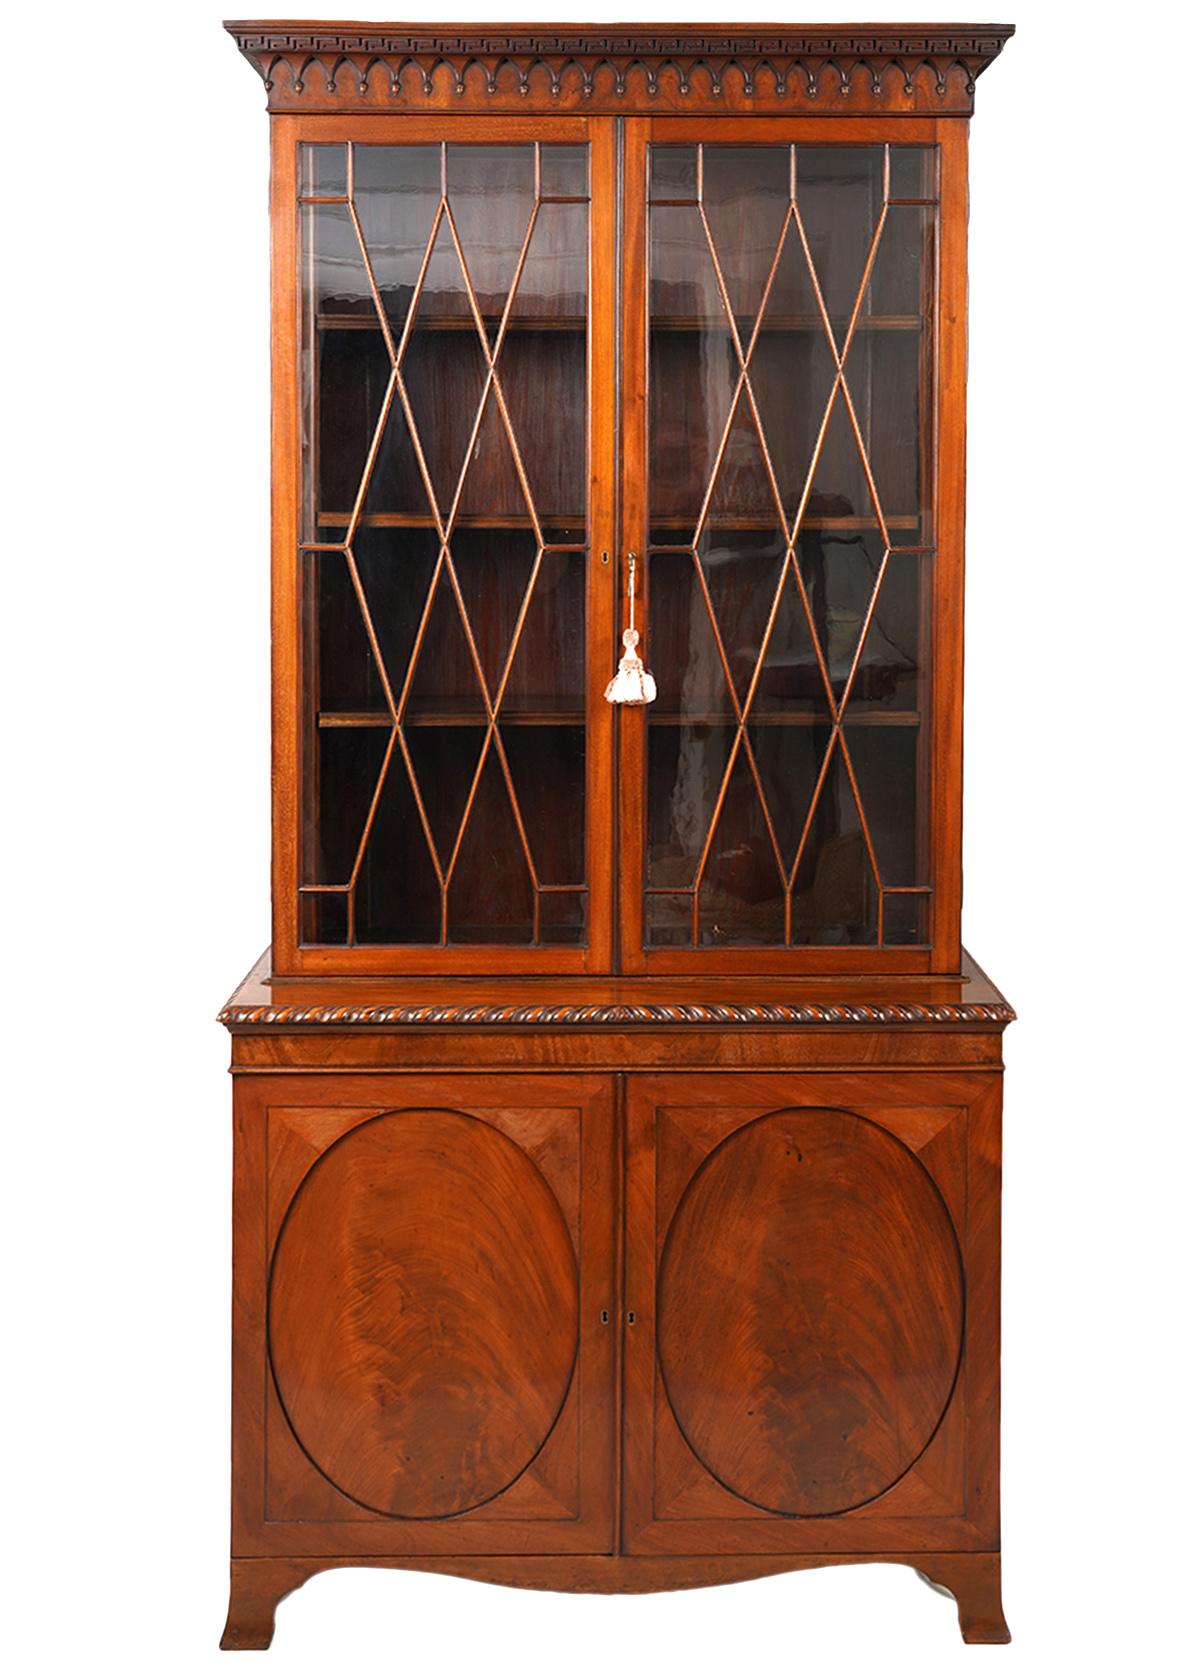 This rare pair of English Edwardian two part bookcases feature finely carved cornices with Greek and Gothic style elements above two doors sporting diamond shaped mountains. The doors open to adjustable shelved interiors. The lower parts feature